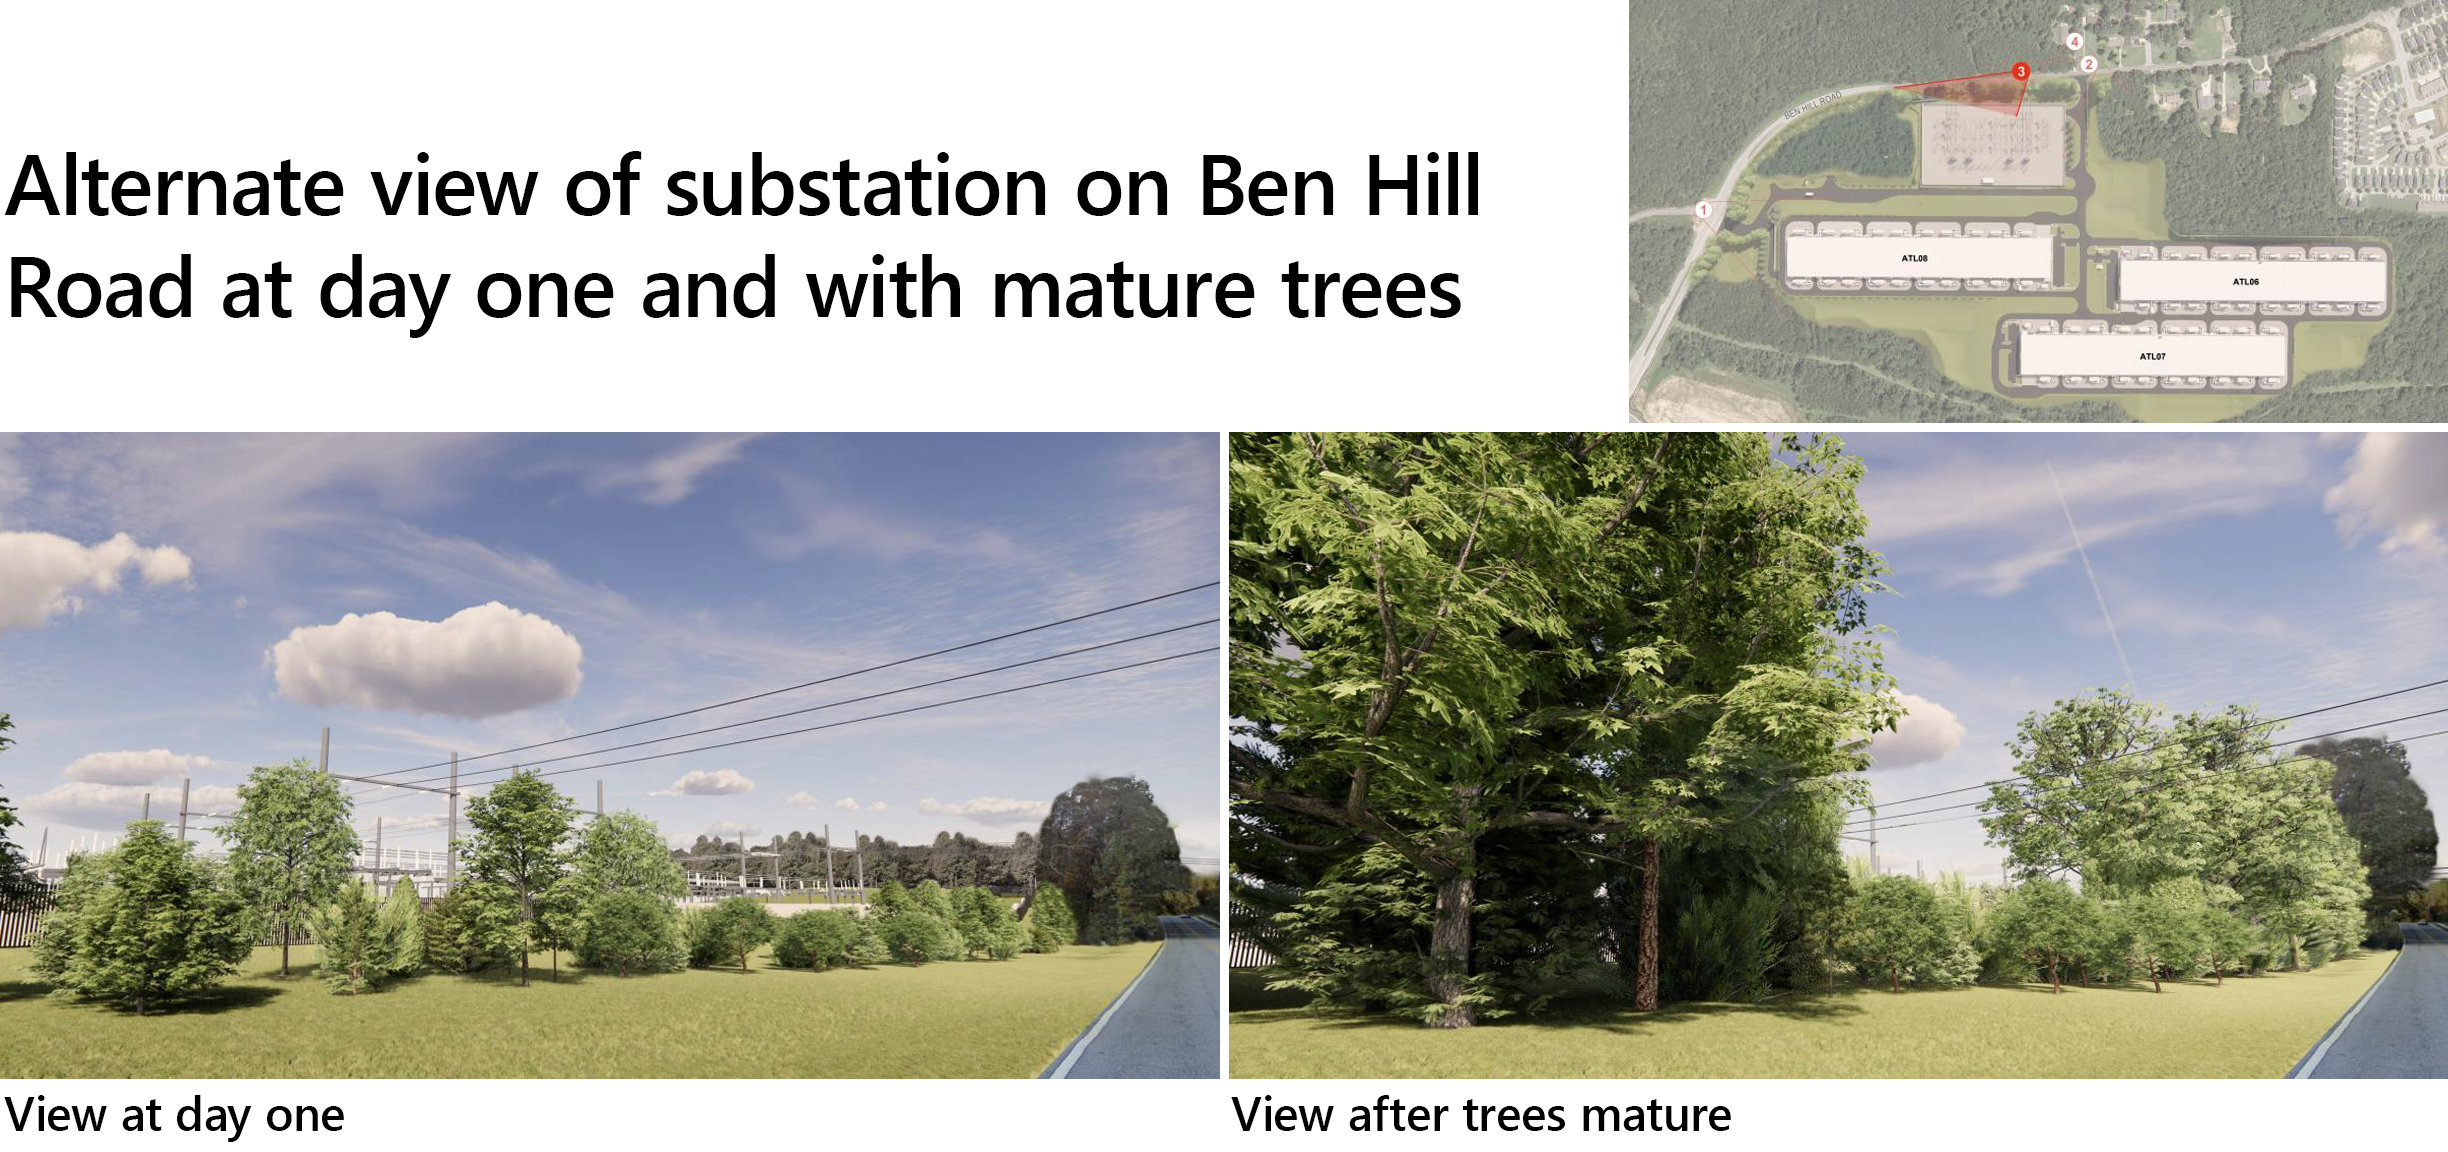 Alternate view of substation on Ben Hill Road at day one and with mature trees